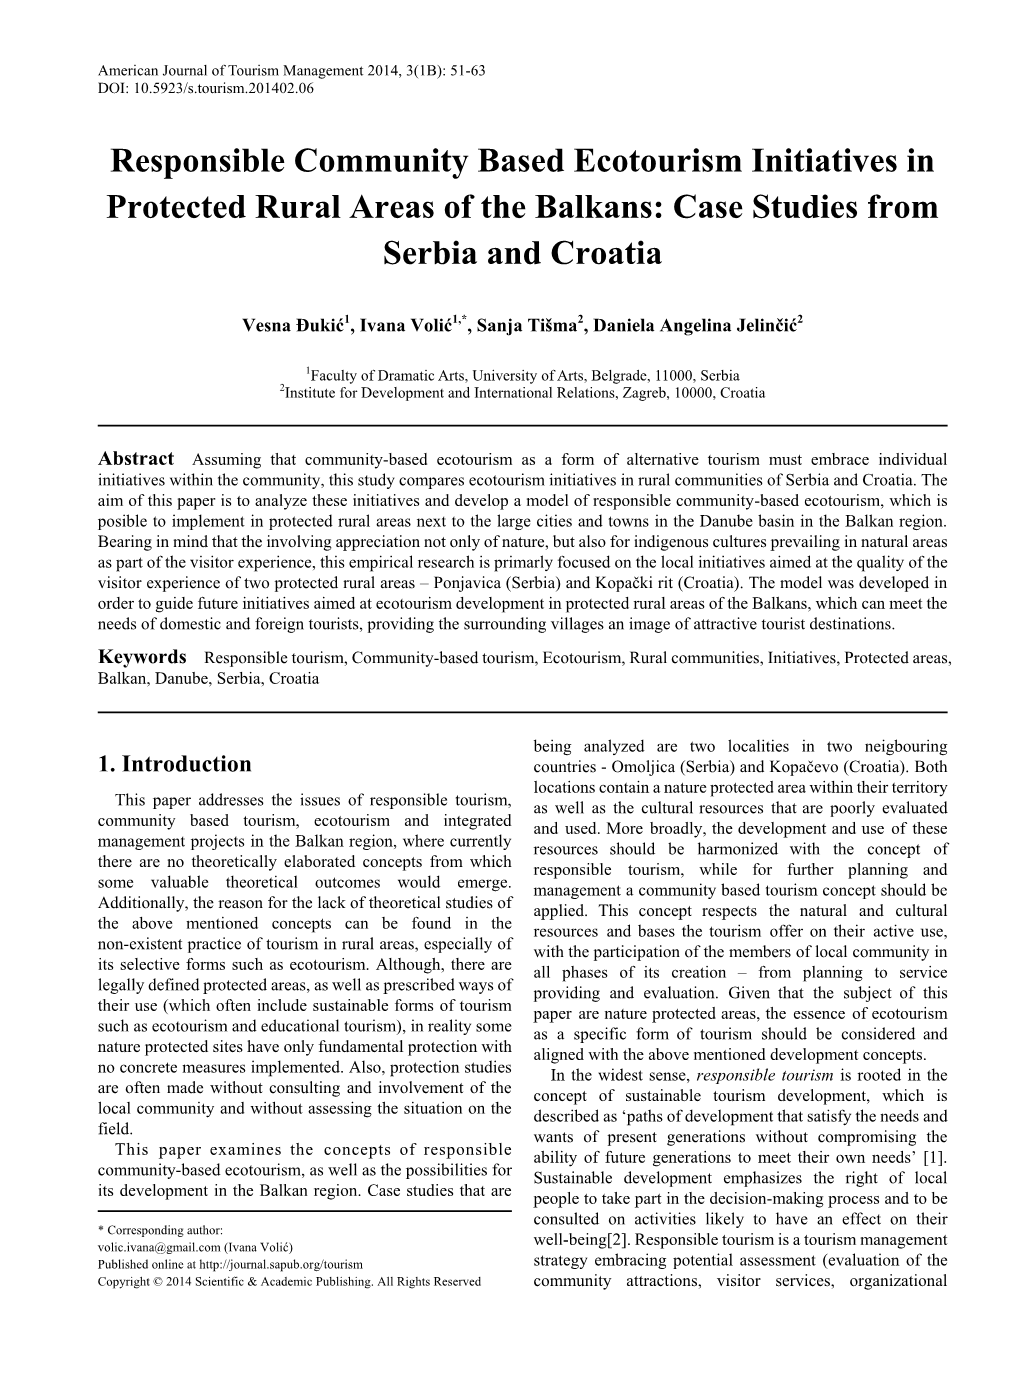 Responsible Community Based Ecotourism Initiatives in Protected Rural Areas of the Balkans: Case Studies from Serbia and Croatia